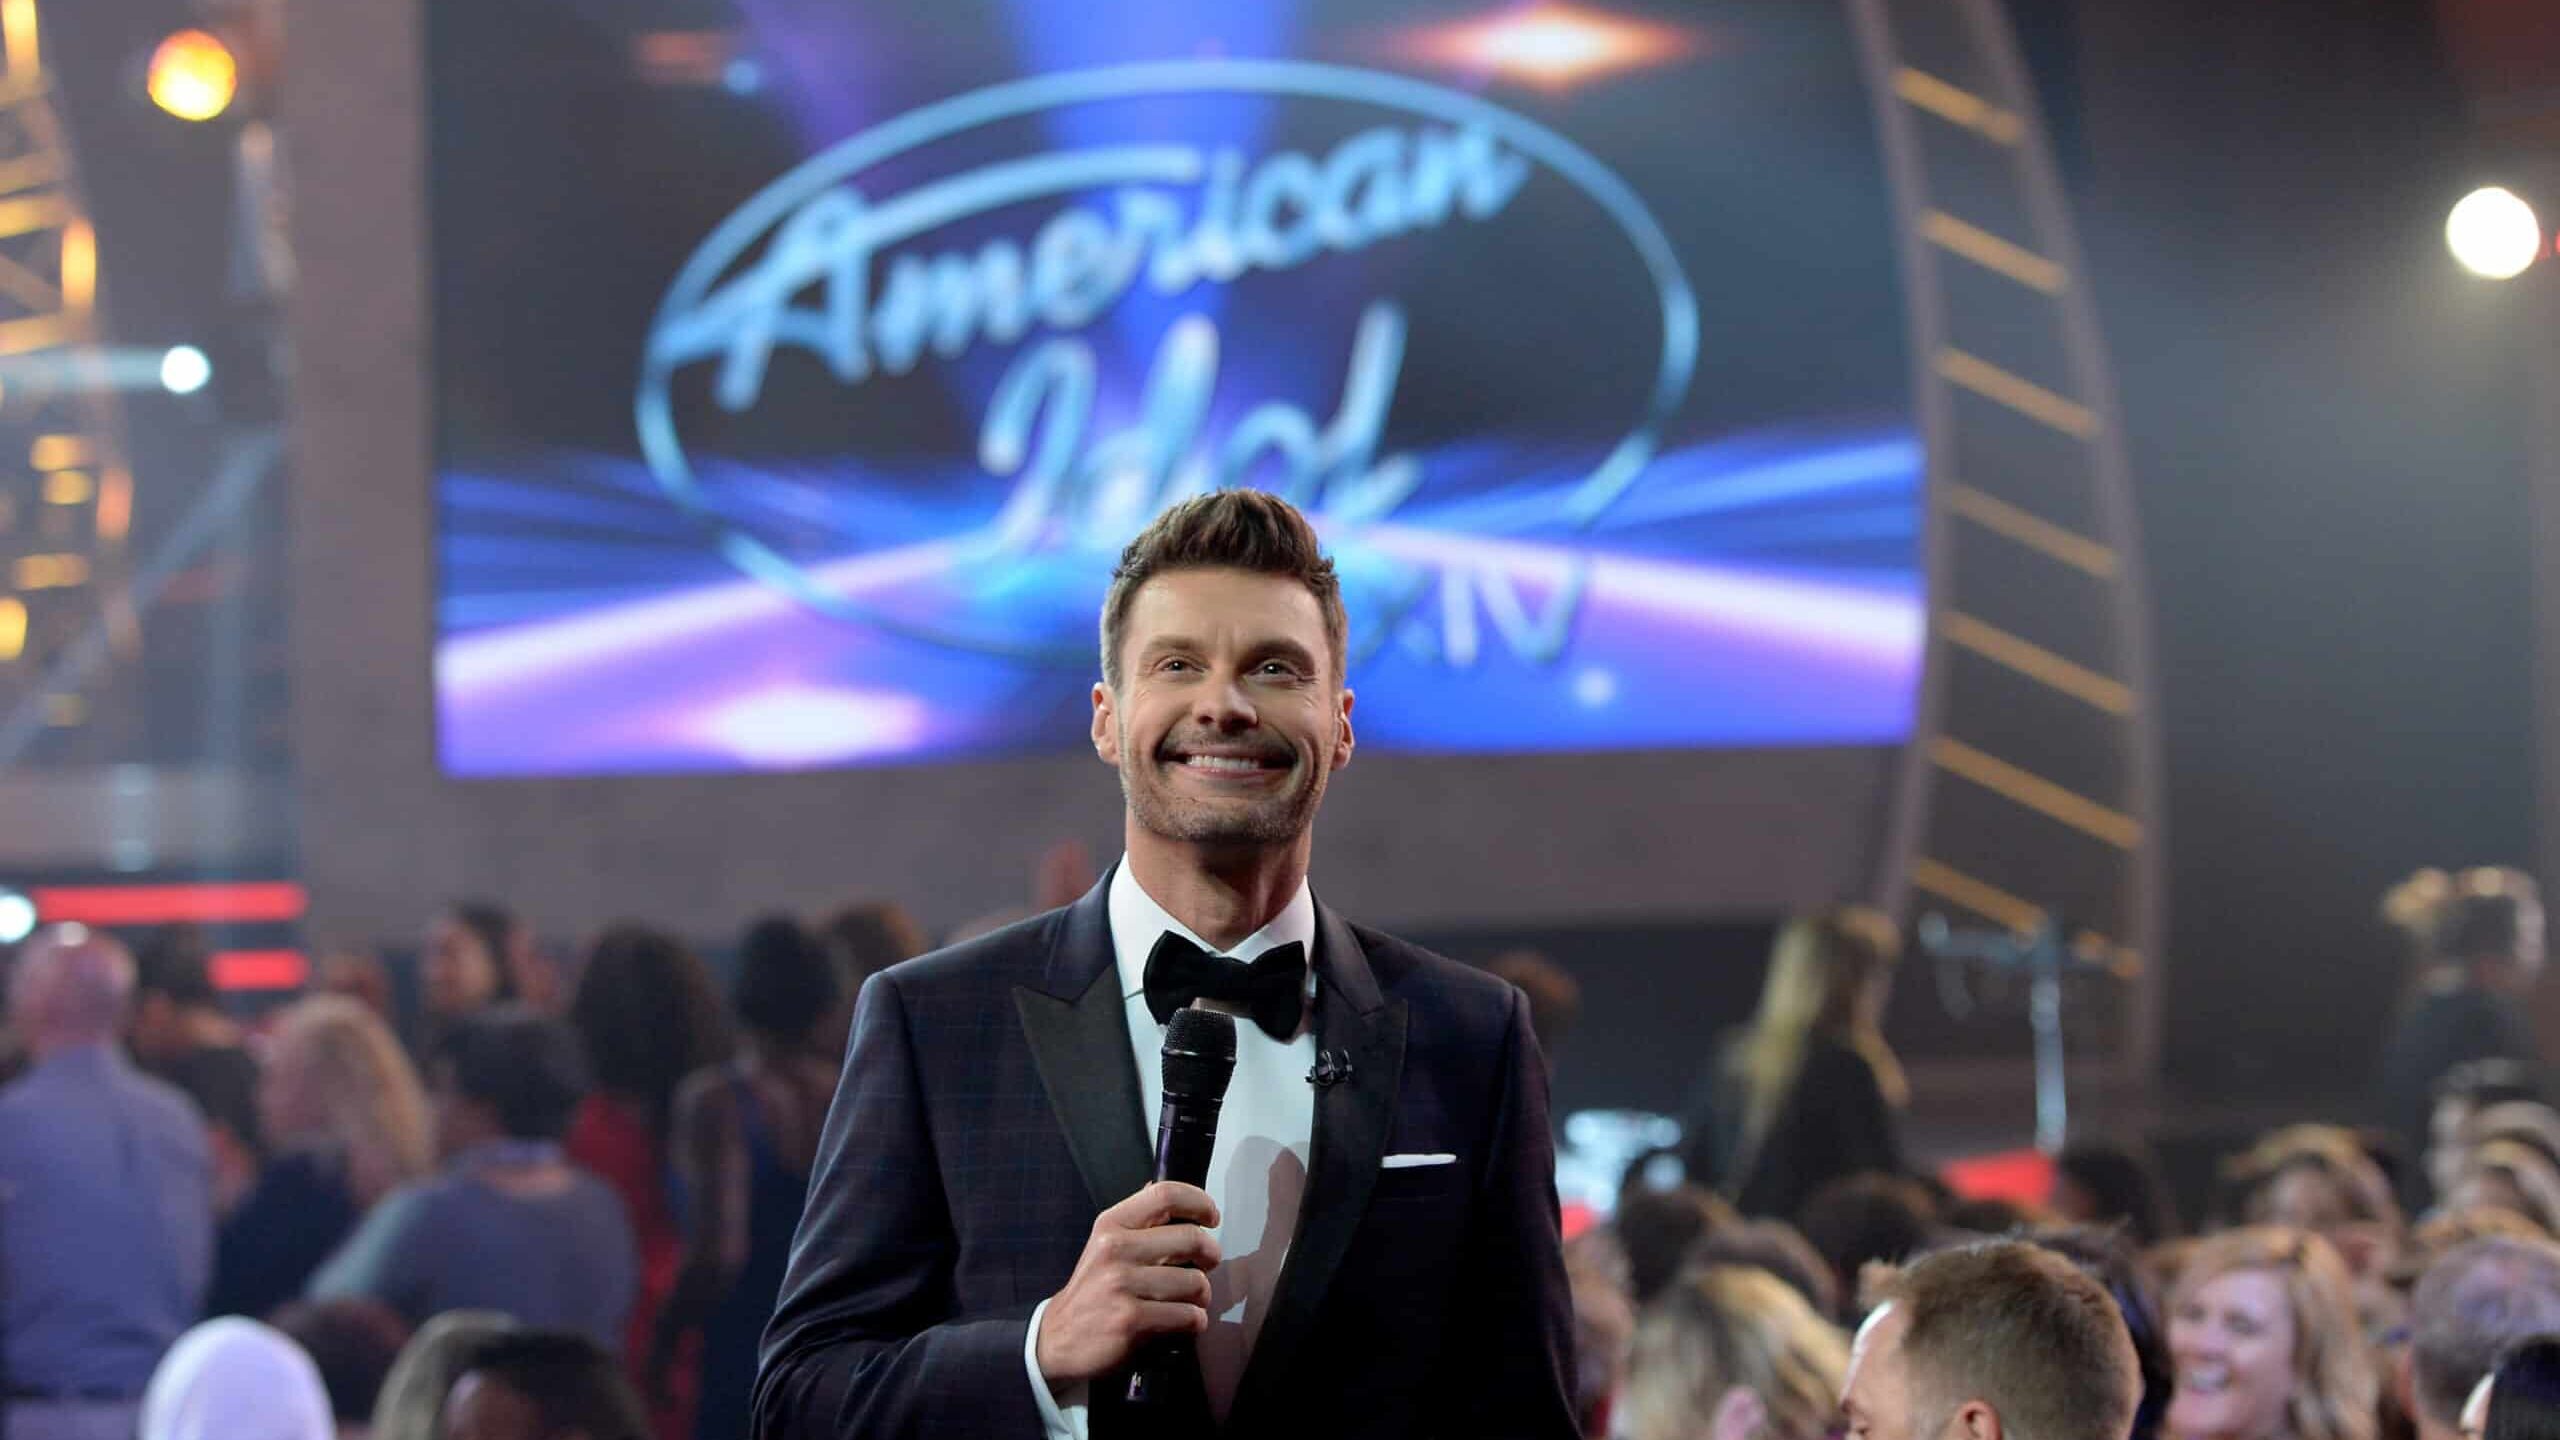 HOLLYWOOD, CA - MAY 13: Host Ryan Seacrest speaks during "American Idol" XIV Grand Finale at Dolby Theatre on May 13, 2015 in Hollywood, California.